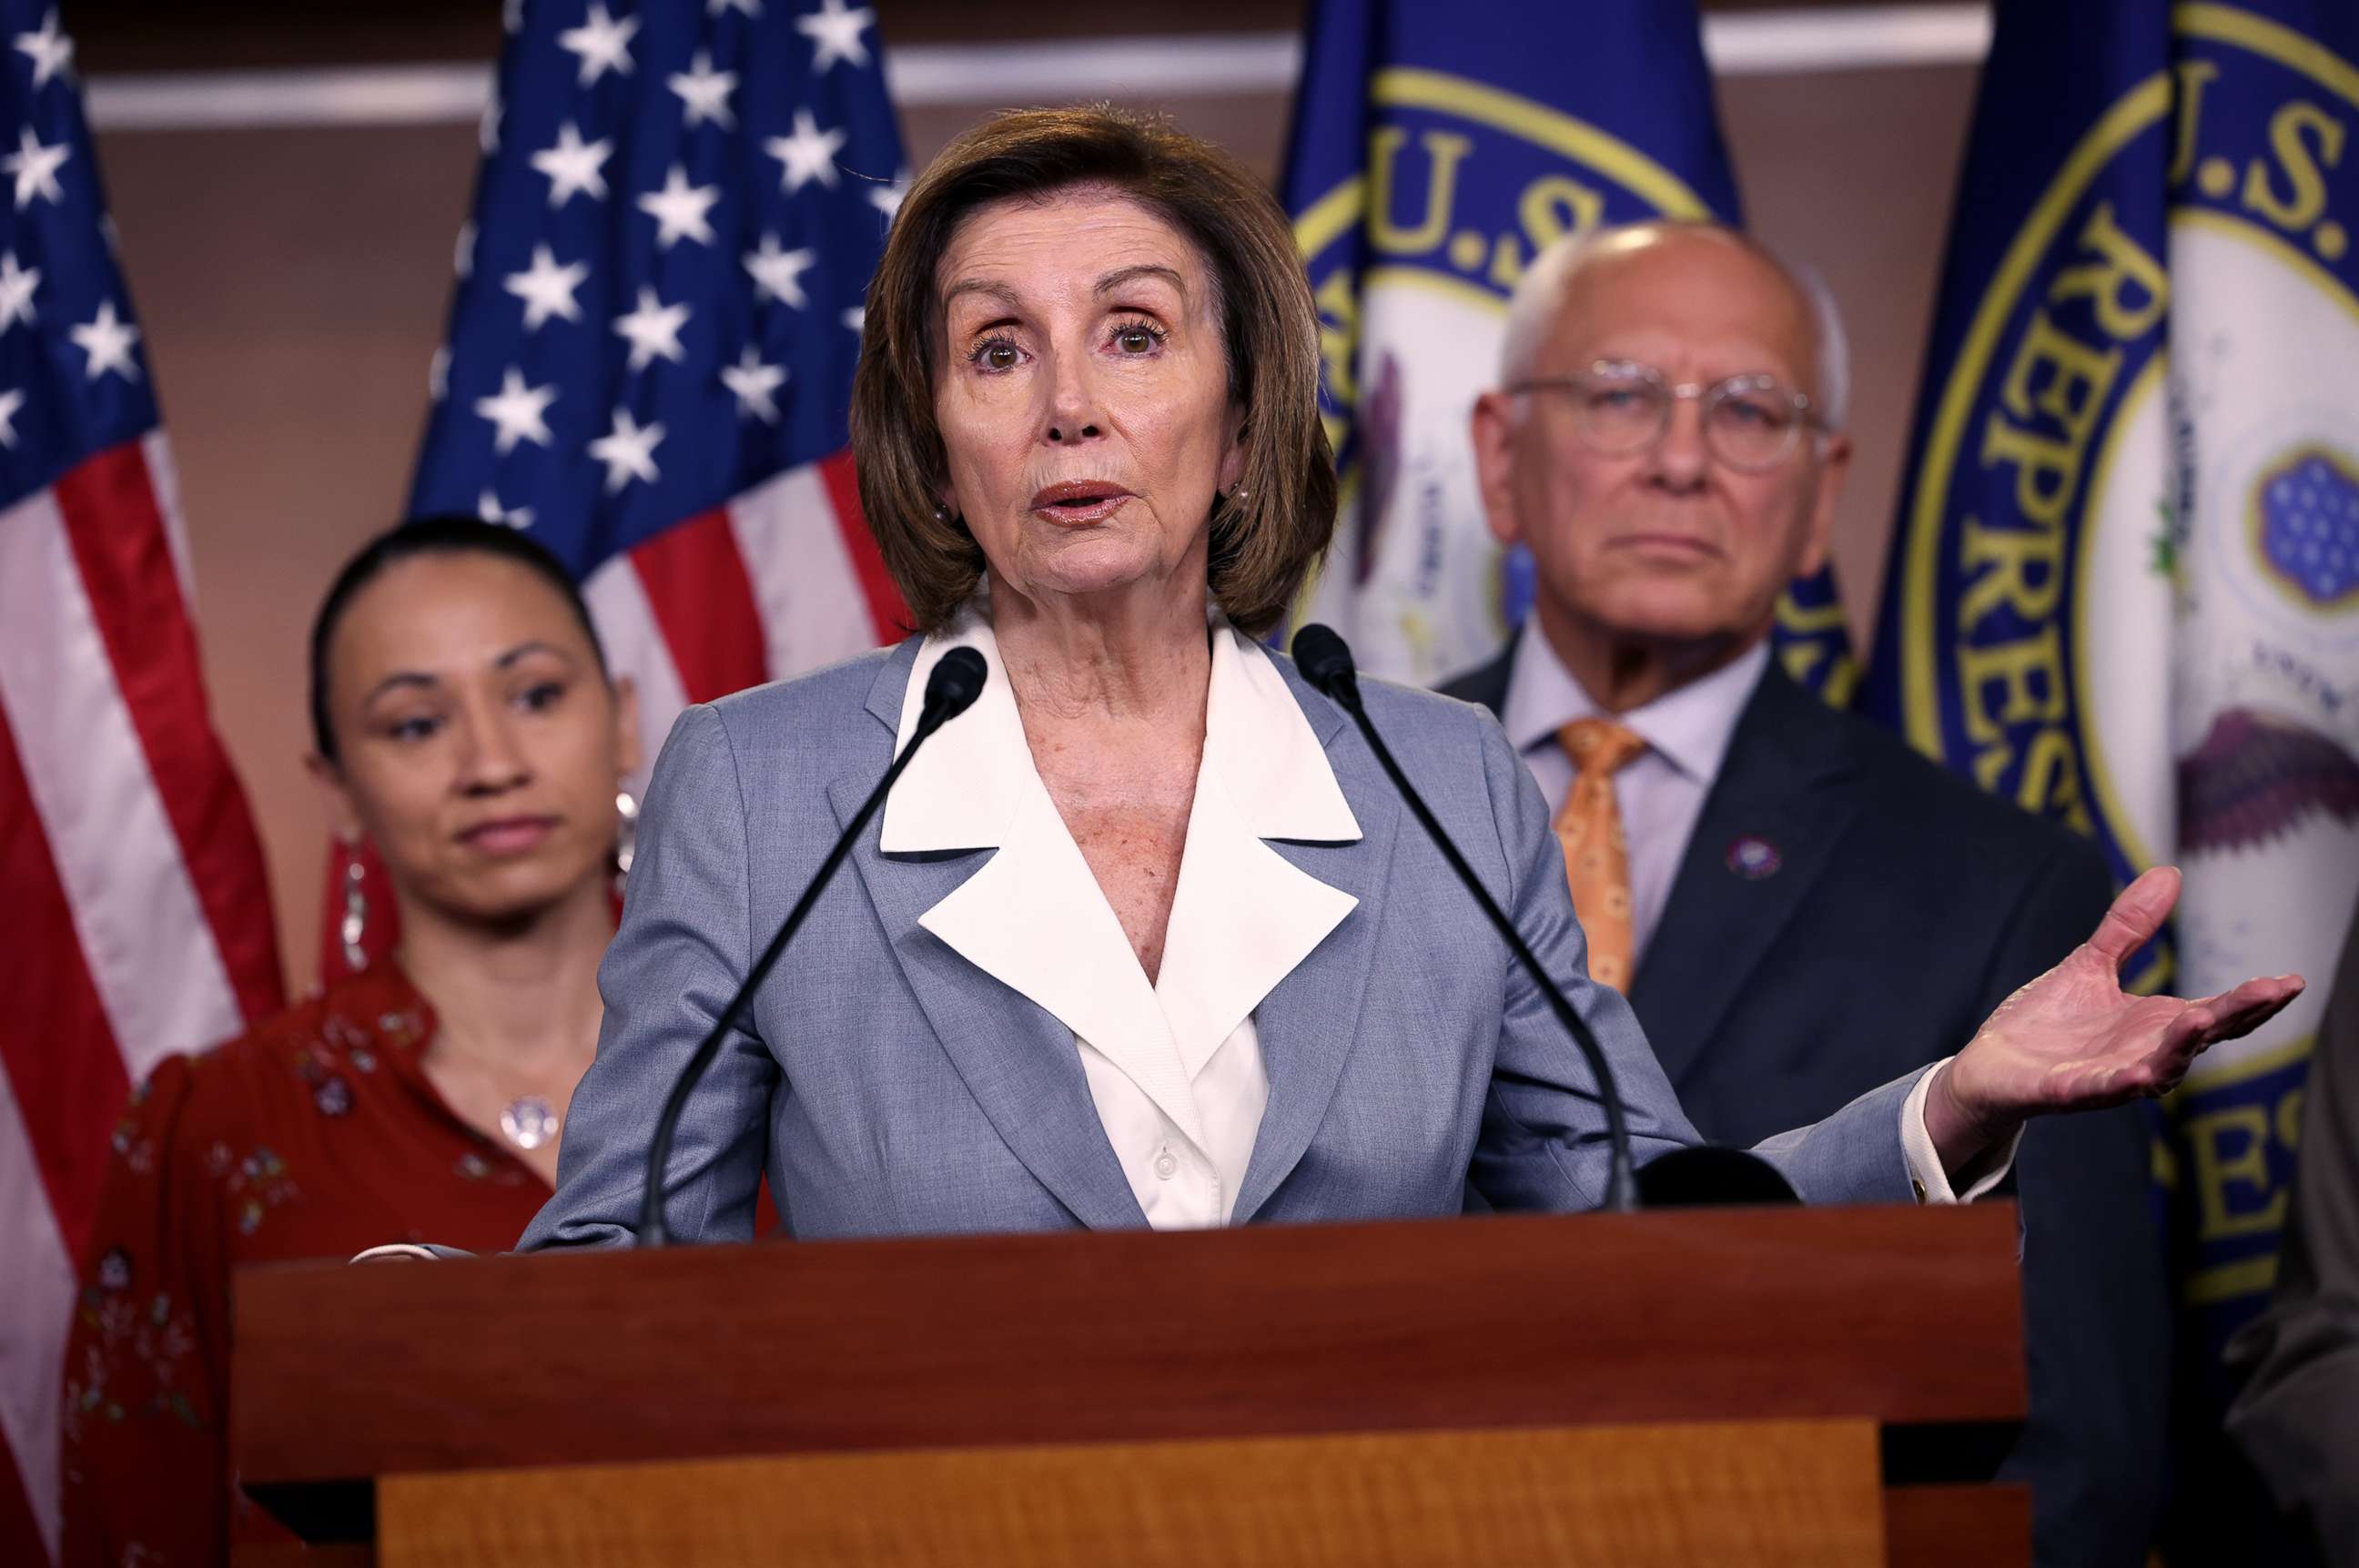 PHOTO: Speaker of the House Nancy Pelosi speaks alongside Rep. Sharice Davids and Rep. Paul Tonko at a press conference on the INVEST in America Act, June 30, 2021, in Washington, D.C. 